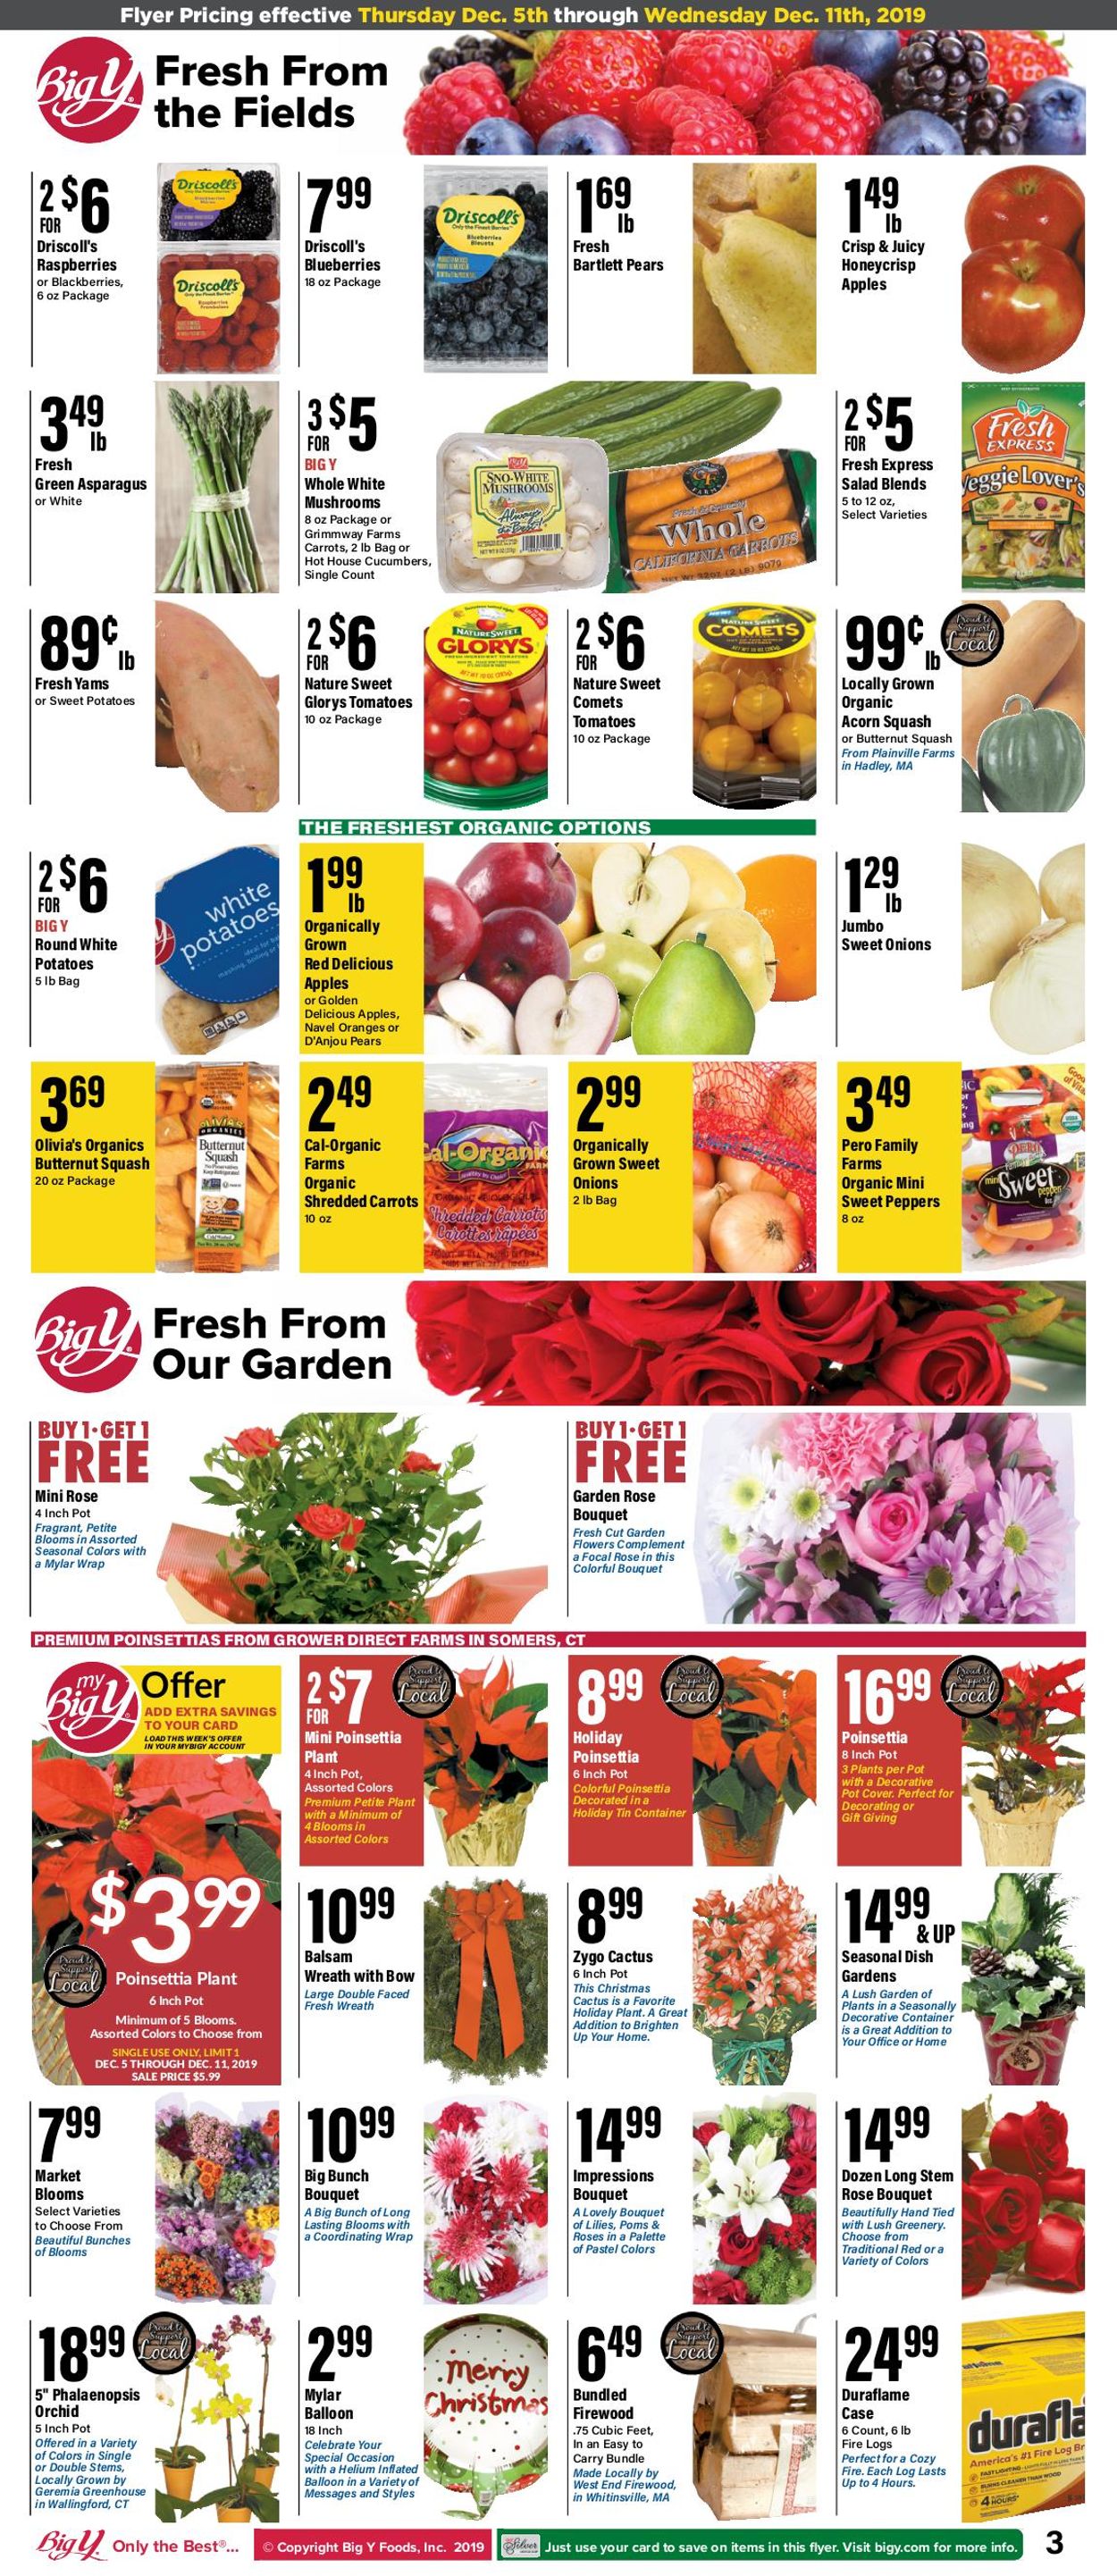 Catalogue Big Y - Holiday Ad 2019 from 12/05/2019